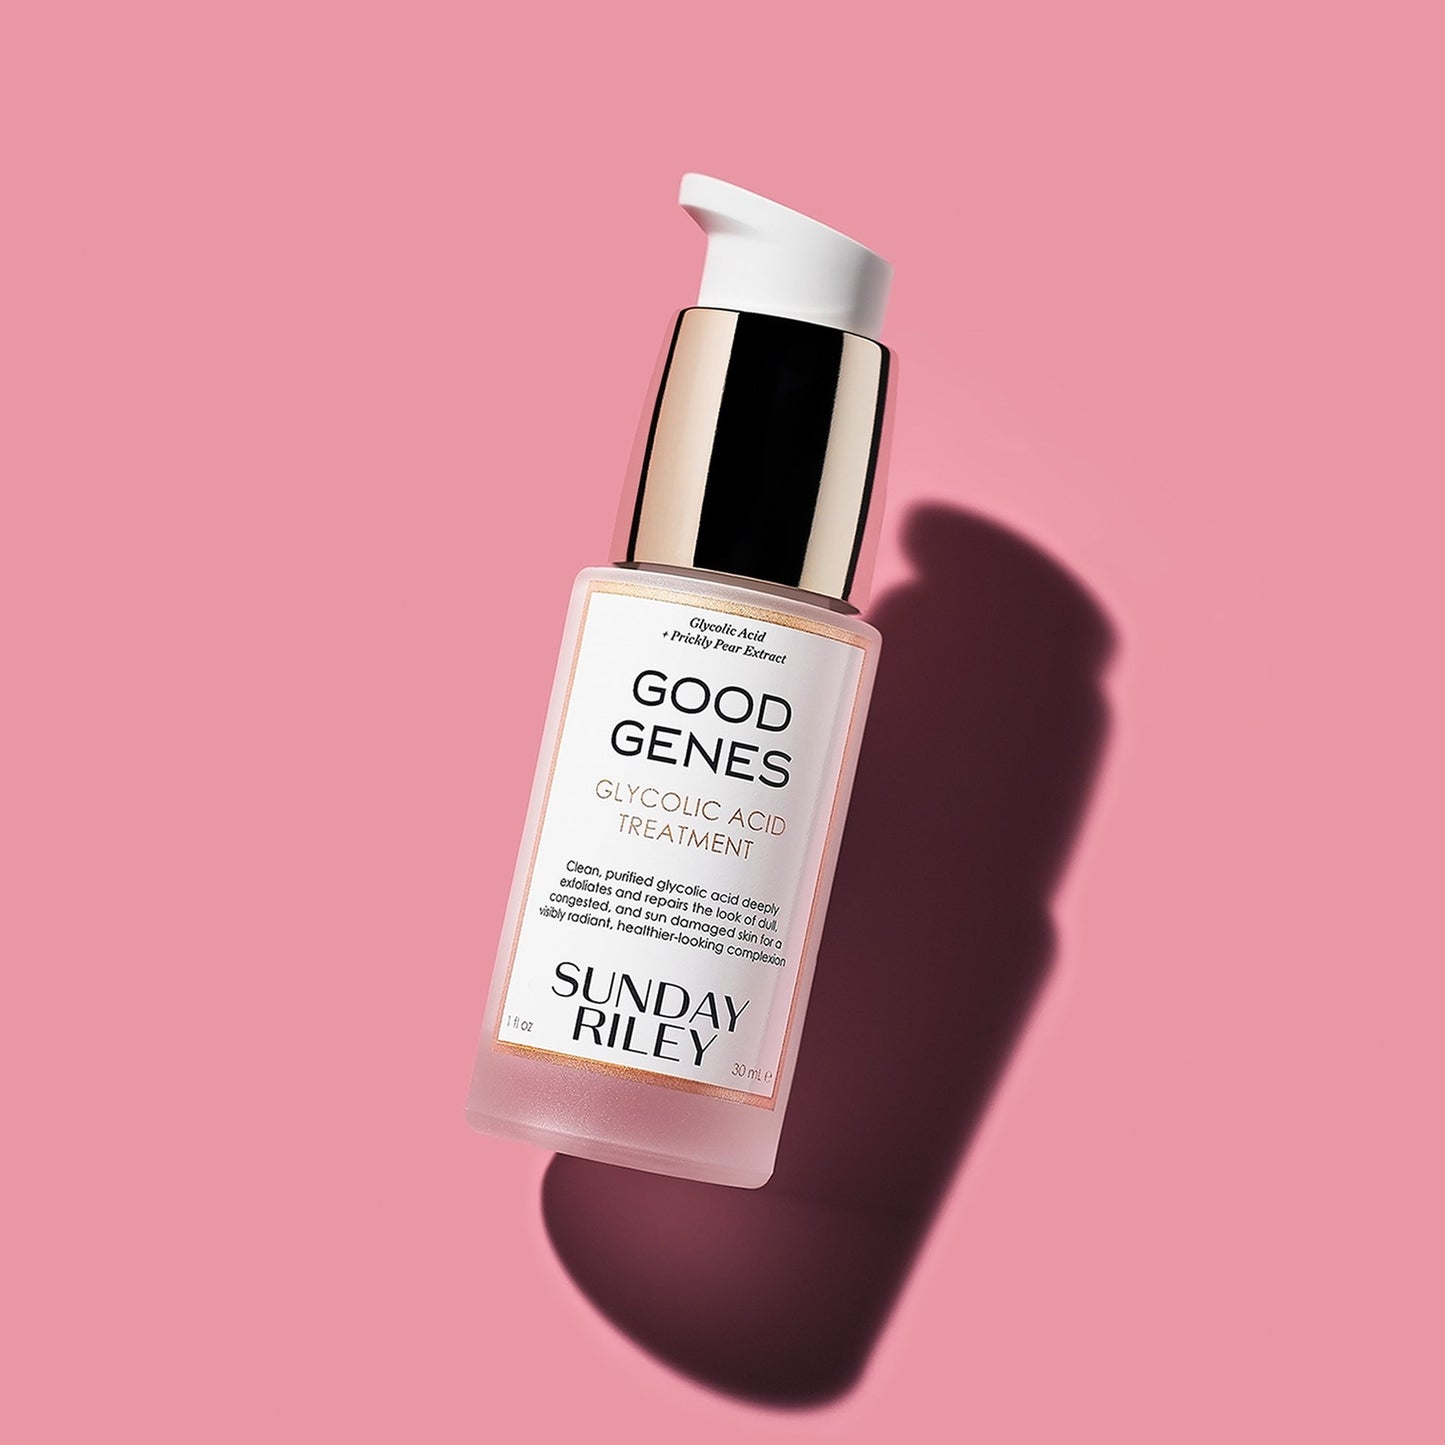 Good Genes Glycolic bottle lay down on a pink background with shadow